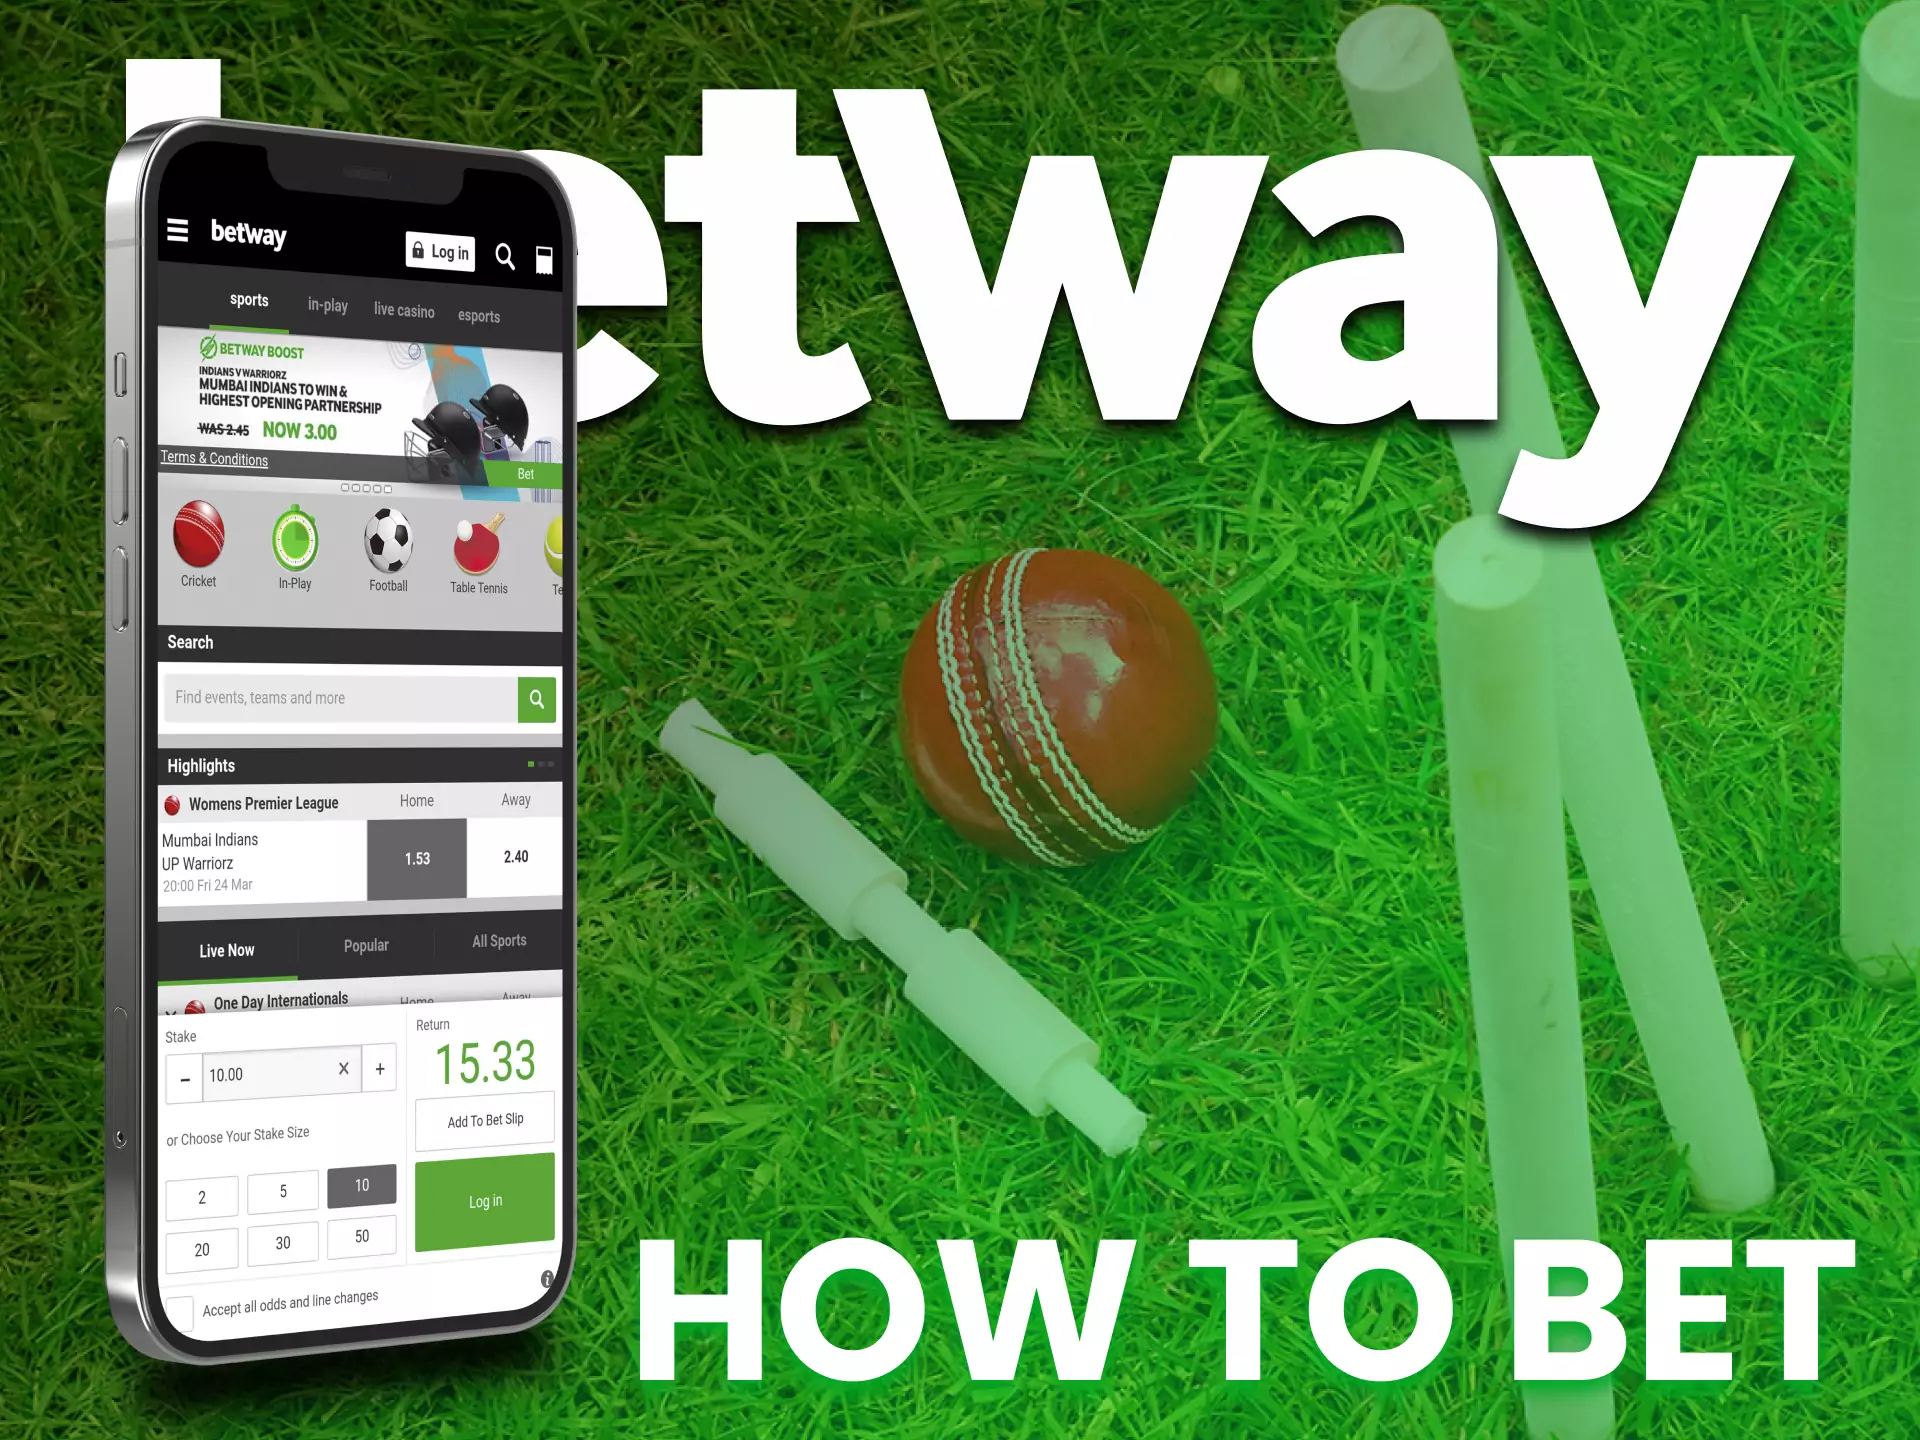 With these instructions, start betting easily on the Betway app.